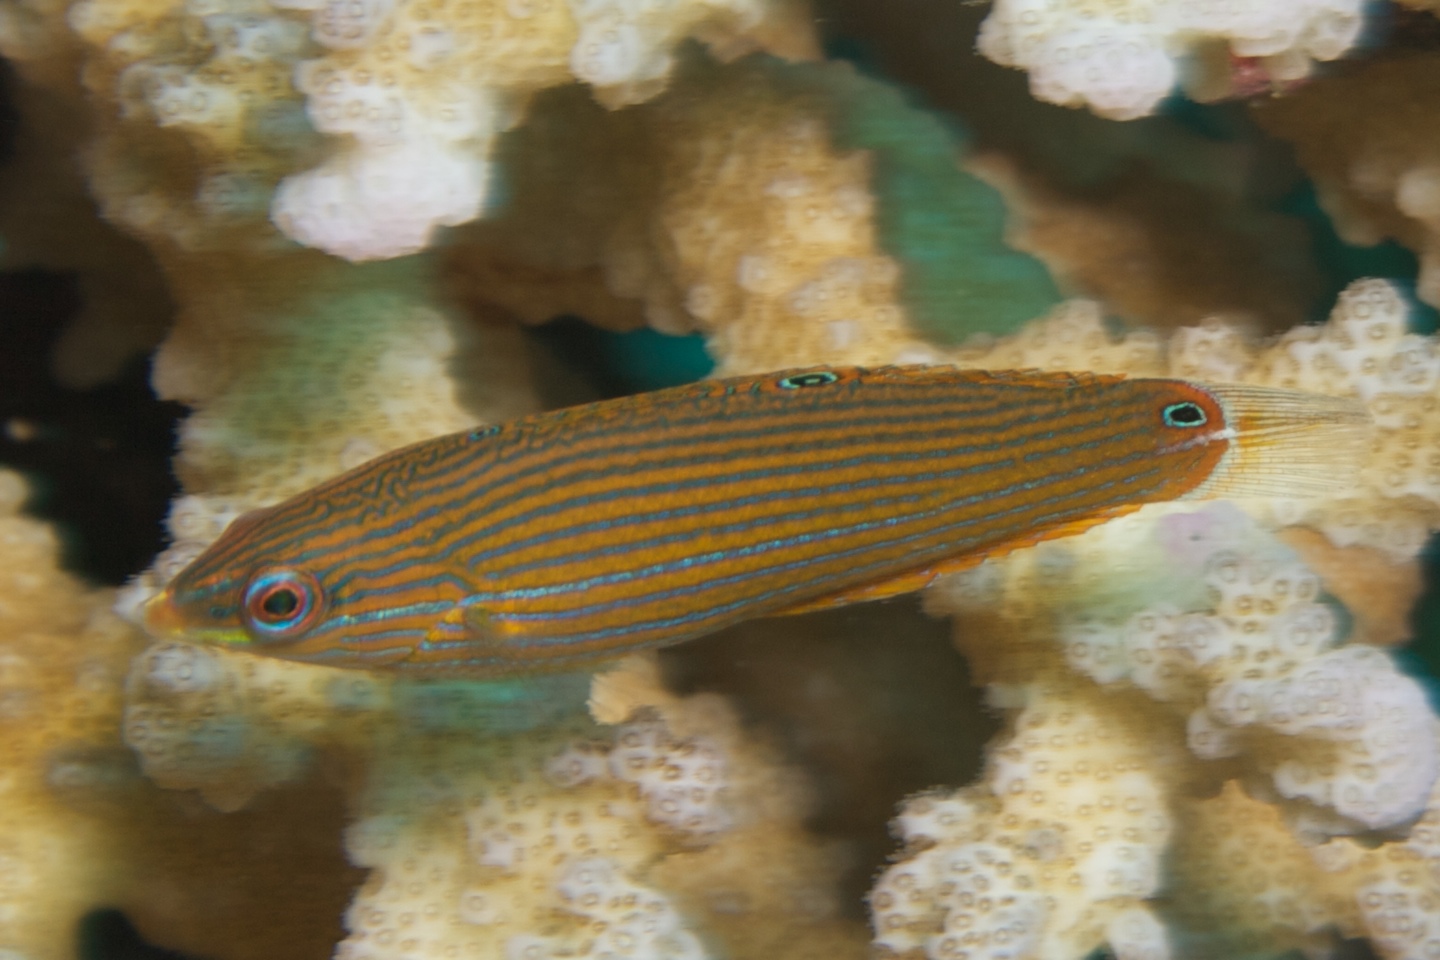 Pinstriped wrasse